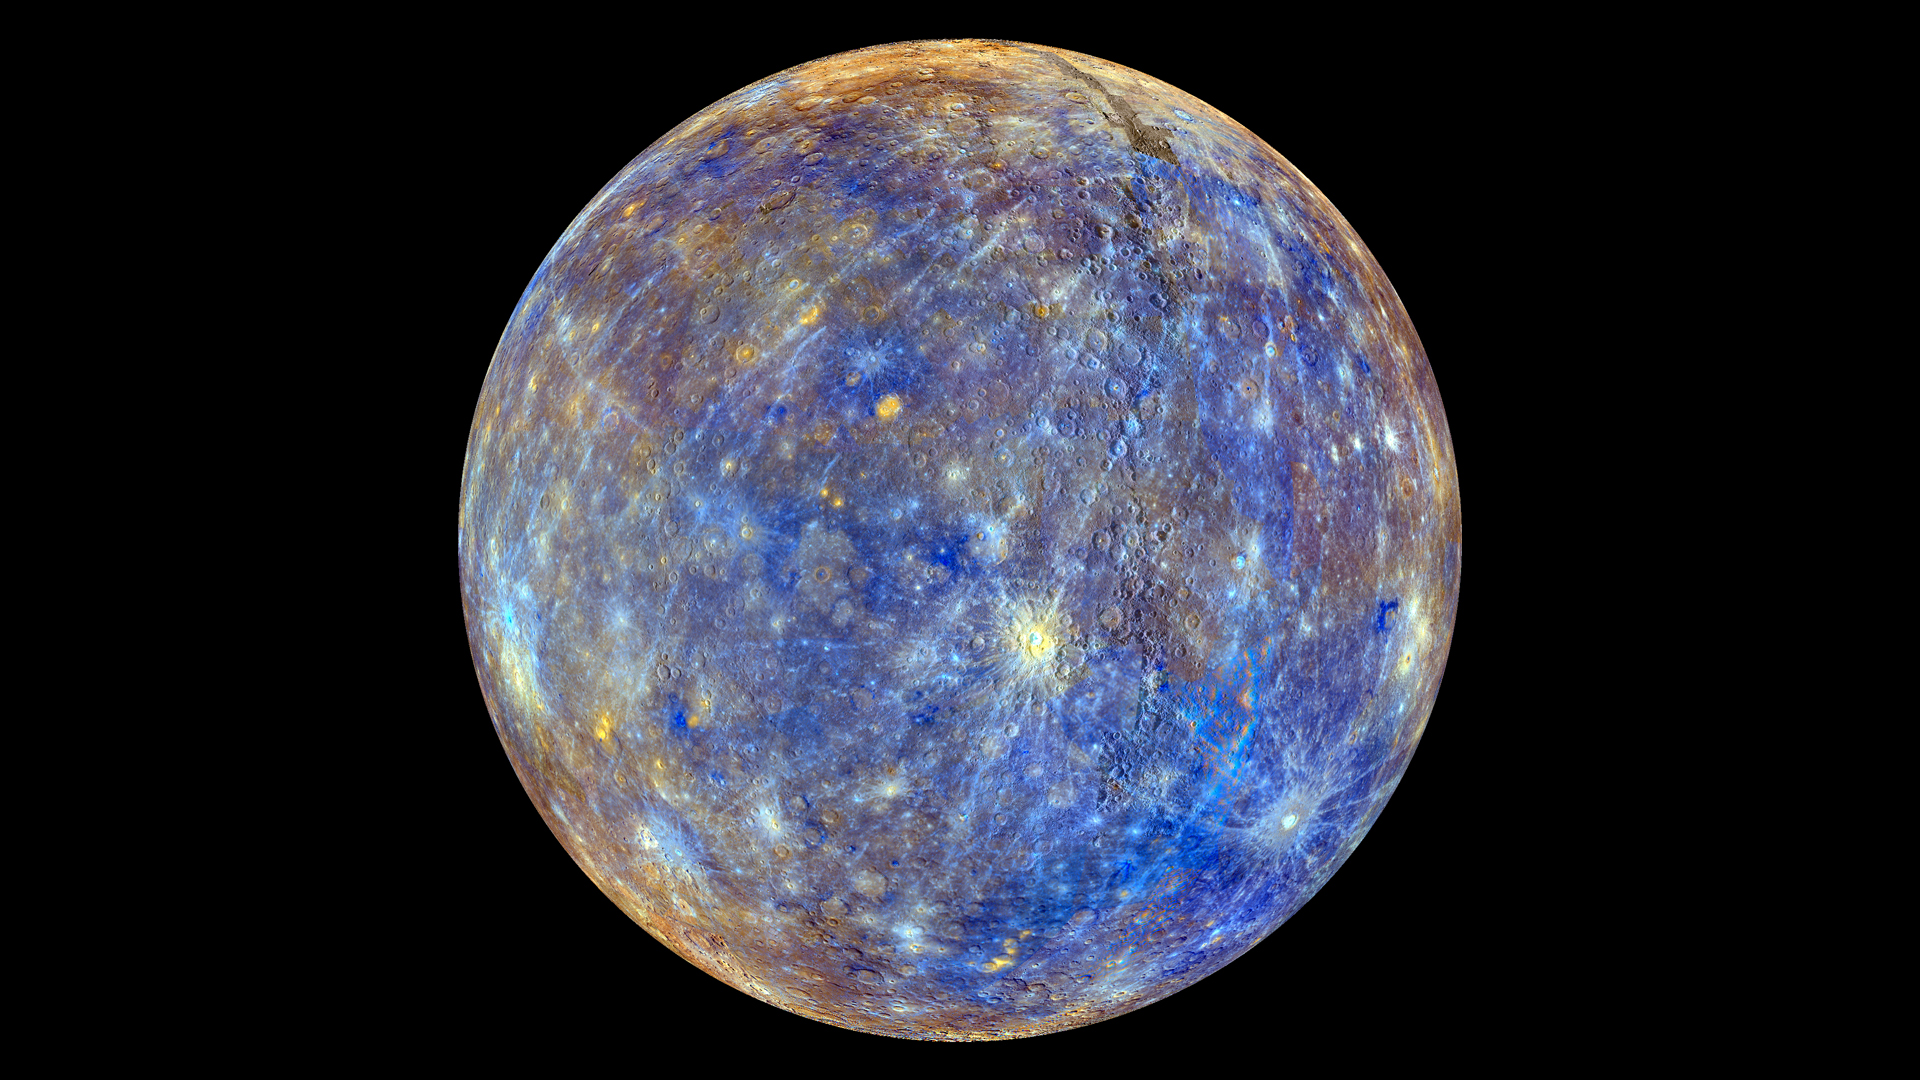 Mercury Has Fewer Large Boulders Than the Moon